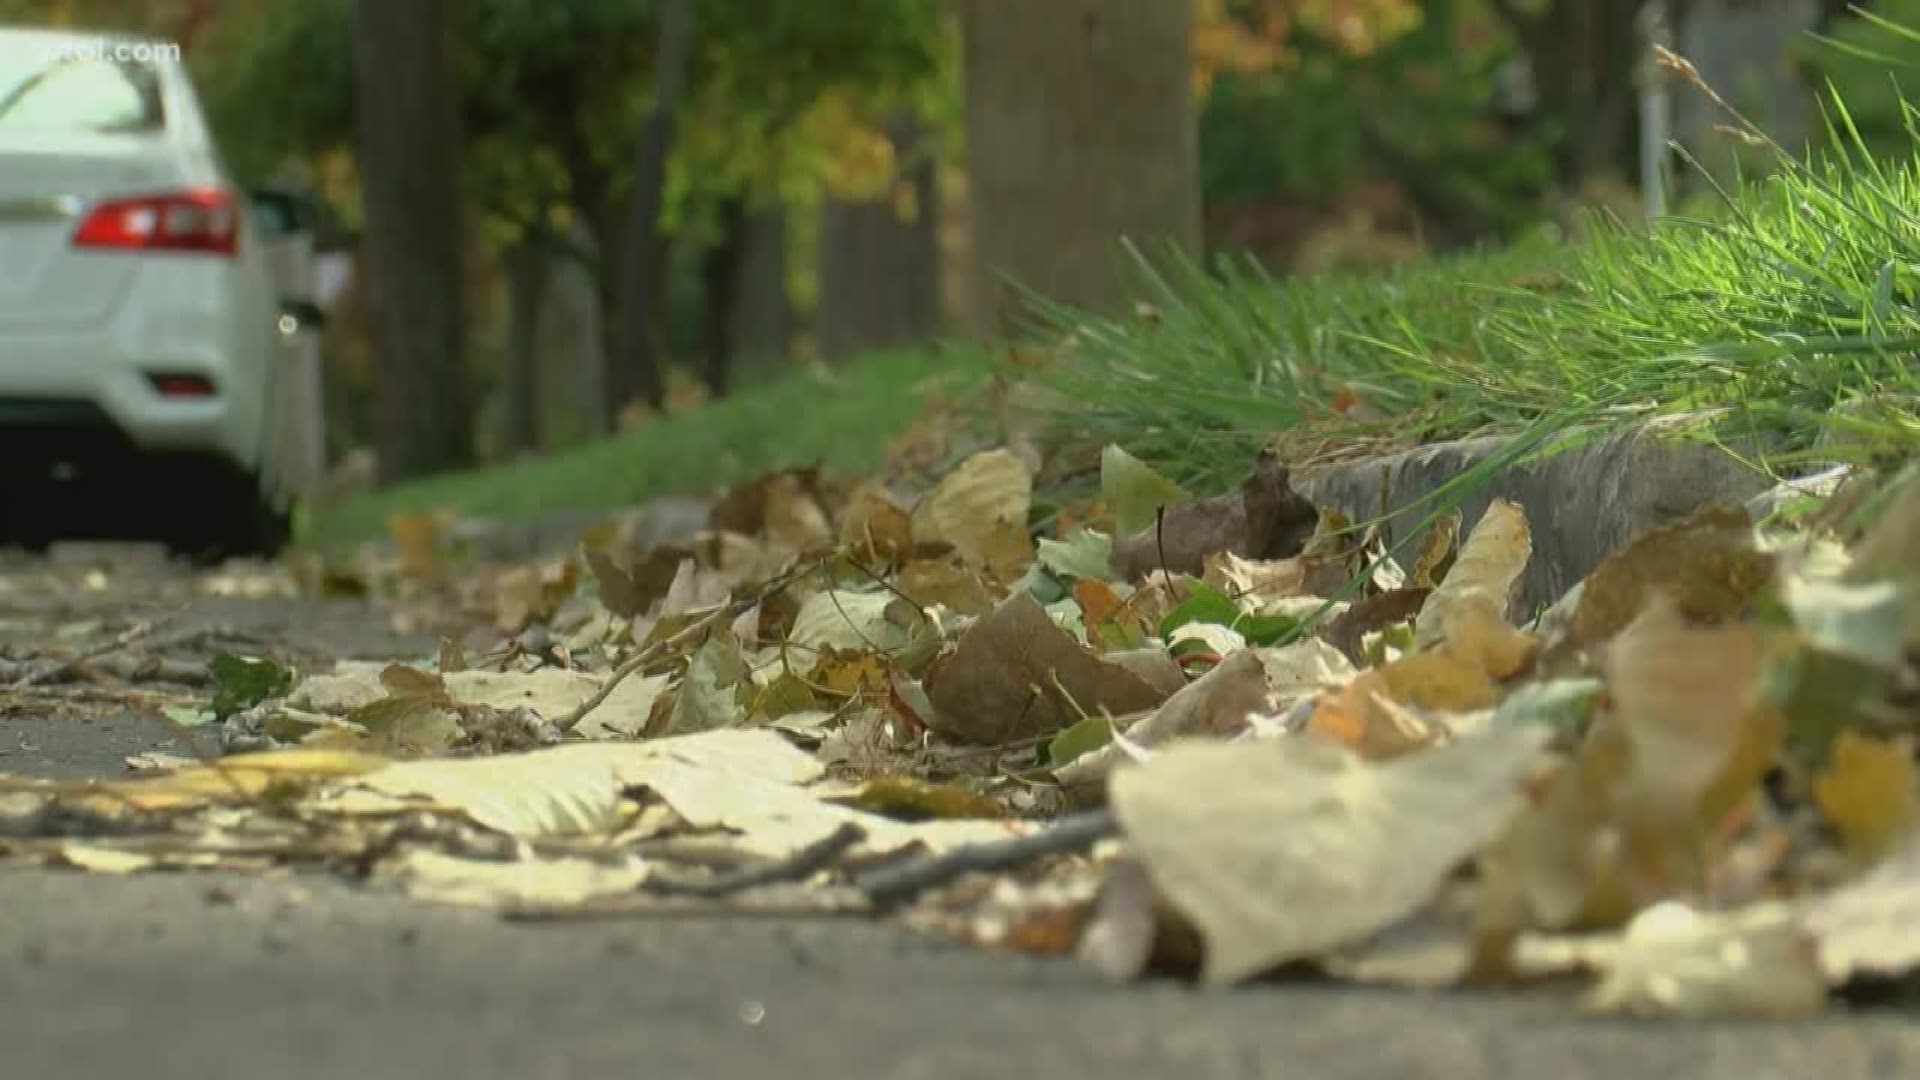 The snow and ice will be affecting leaf collection schedules, here's what you need to know if your leaves haven't been picked up yet